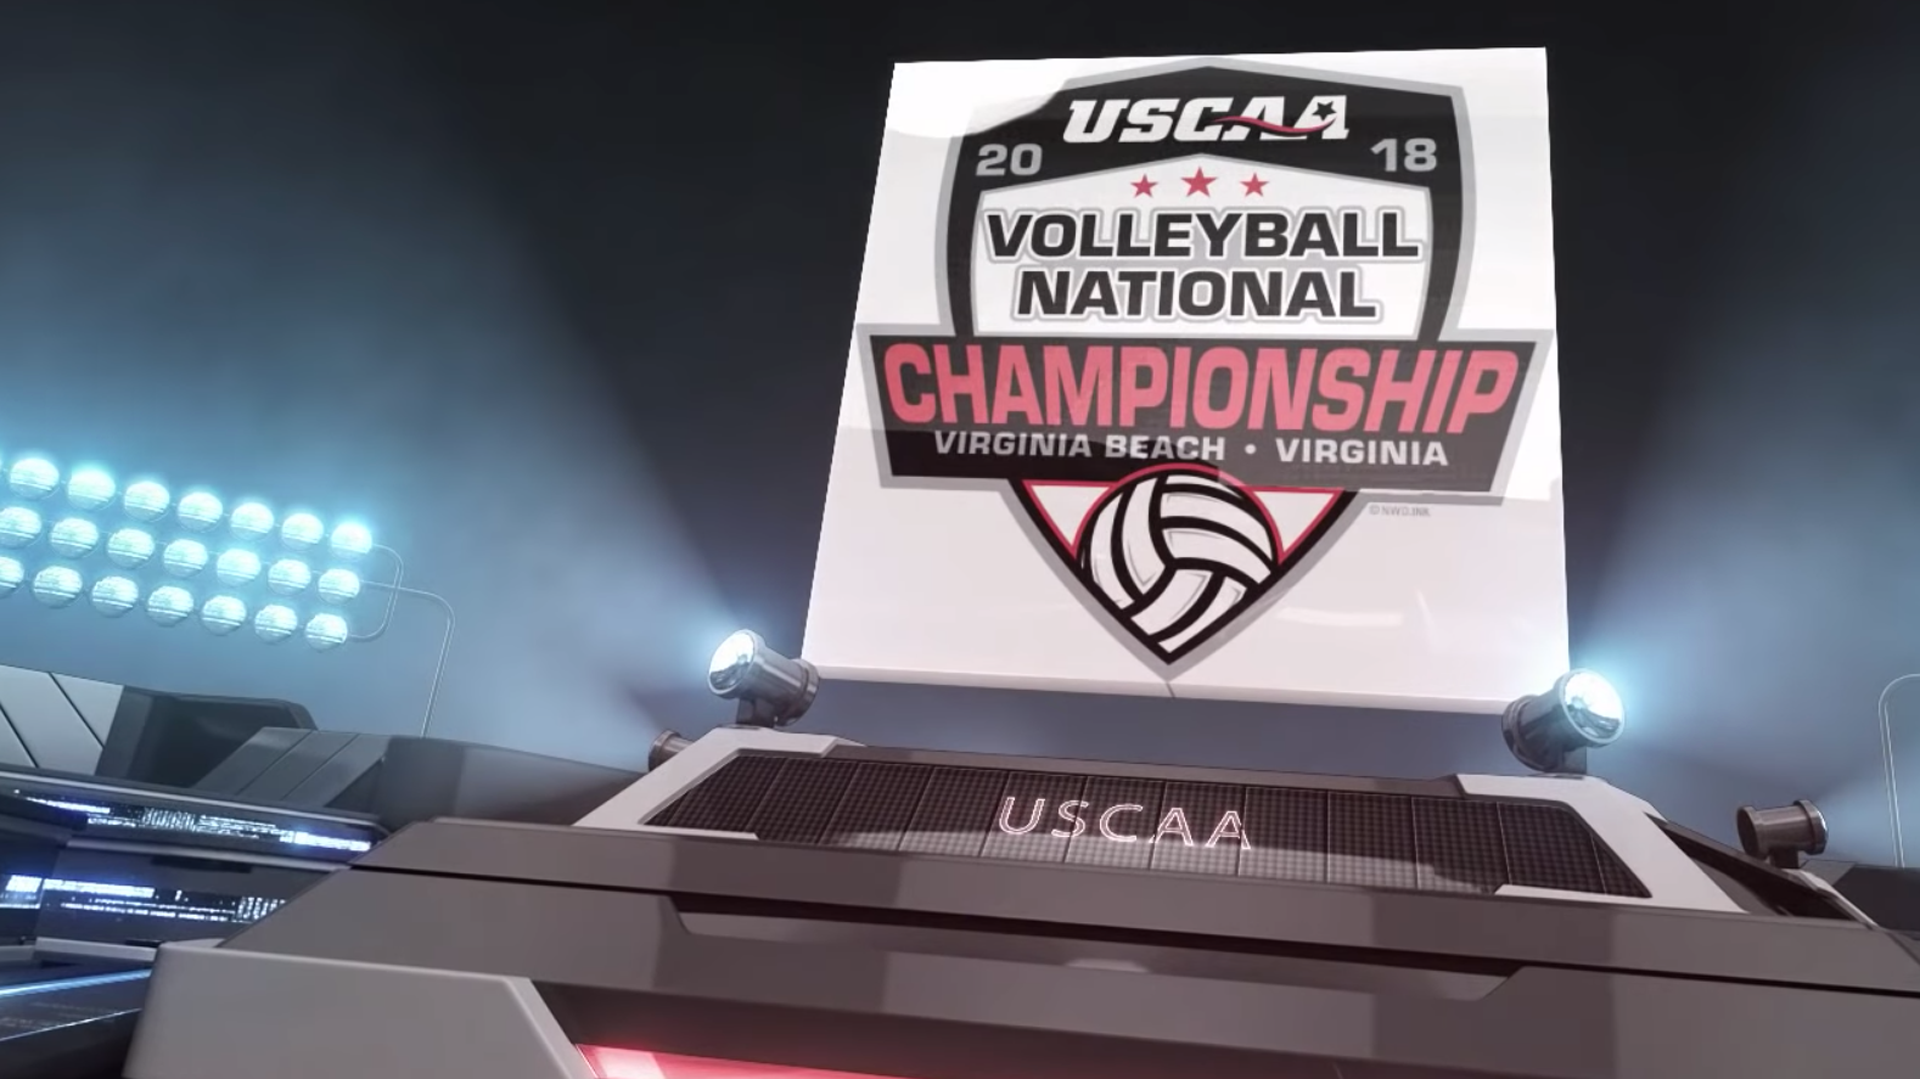 Paul Smith's to compete for USCAA Volleyball National Championship